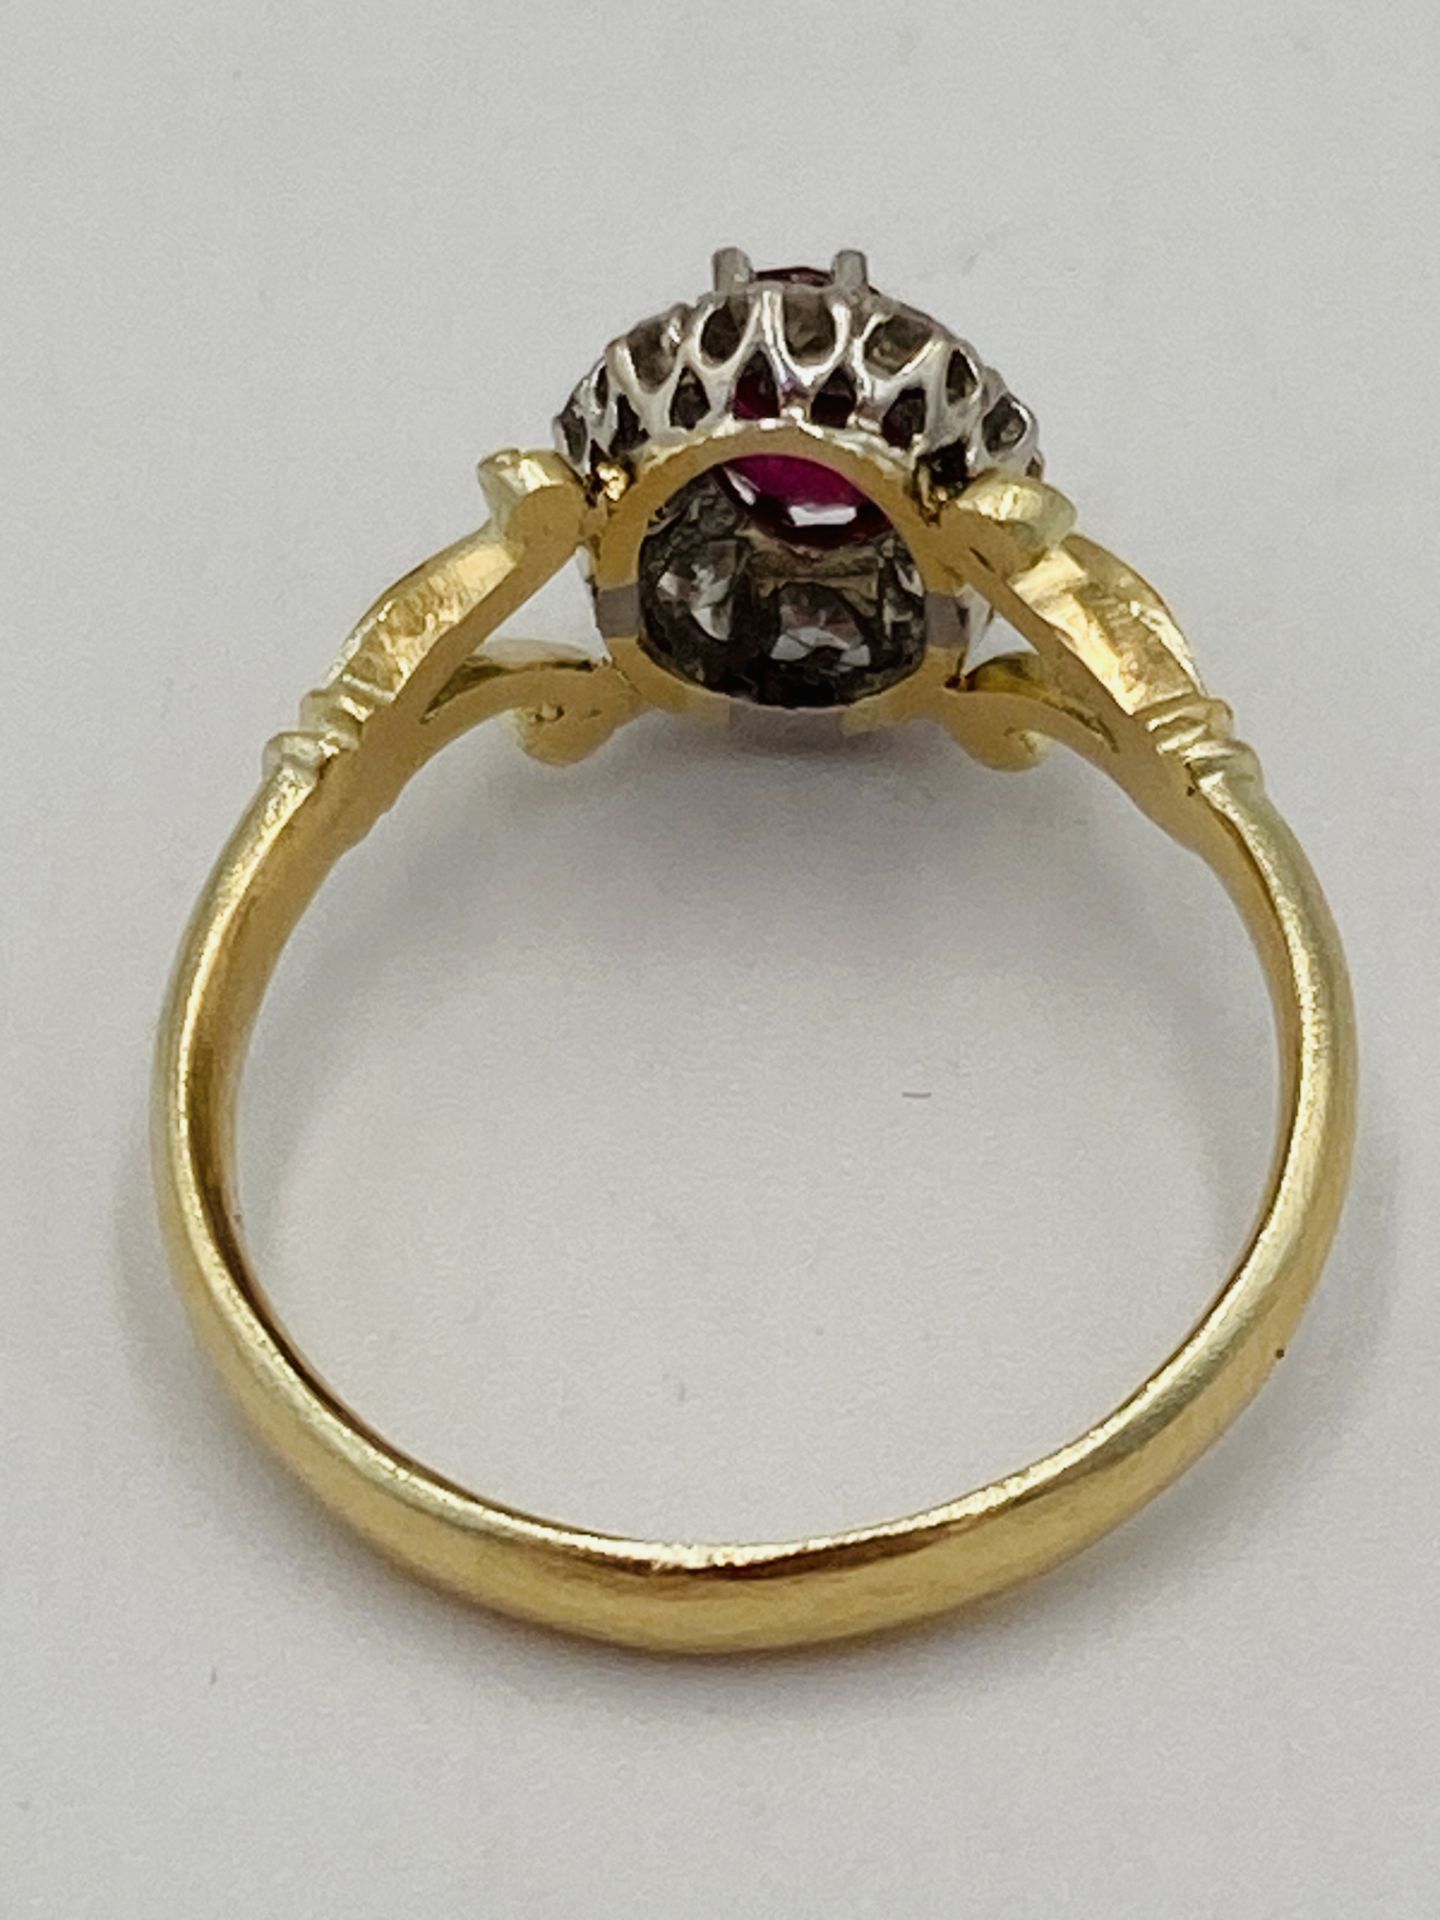 Gold ring set with central ruby and diamond surround - Image 6 of 6